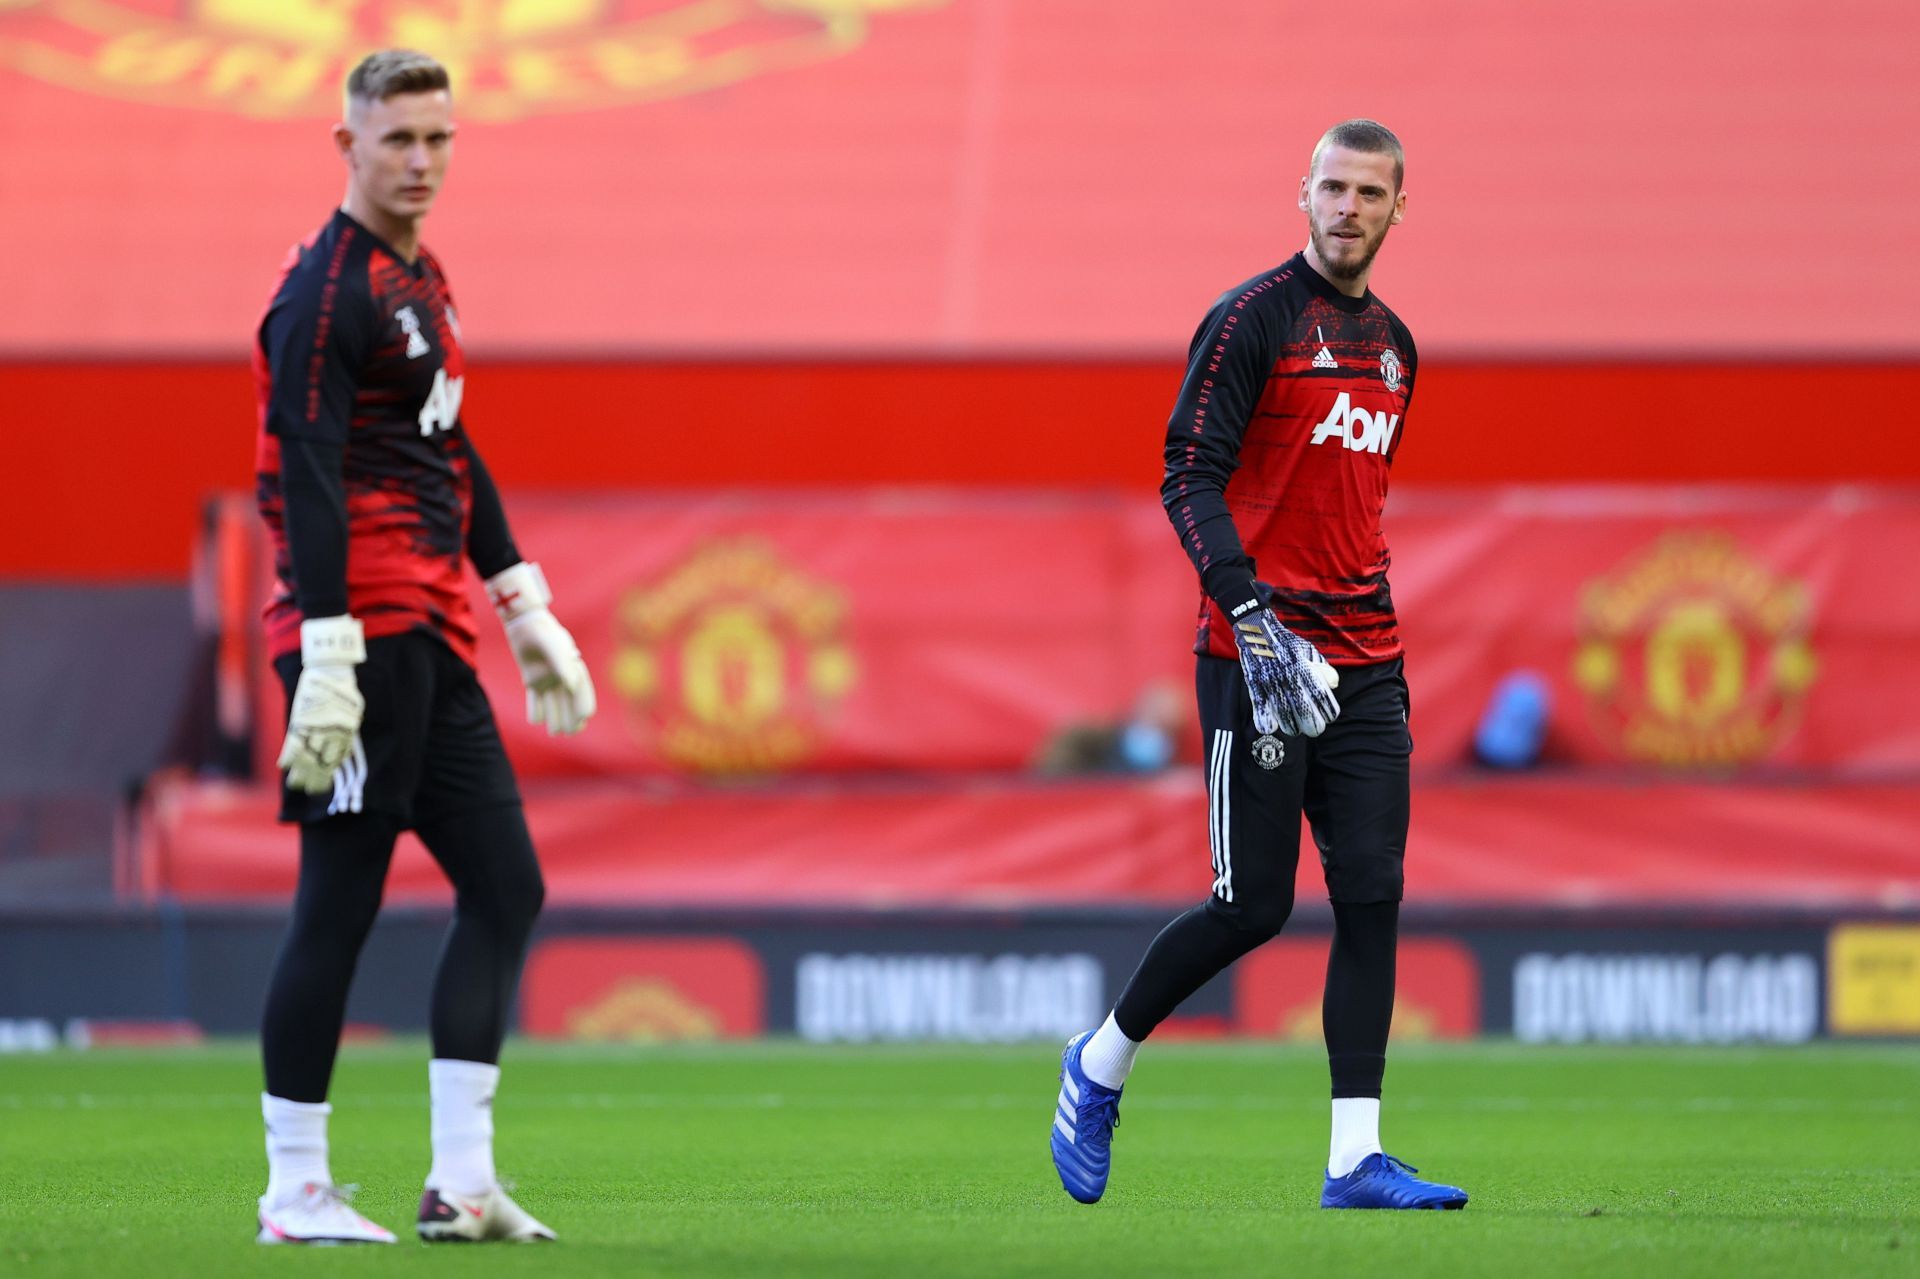 Dean Henderson (L) and David de Gea (R) in training for Manchester United.